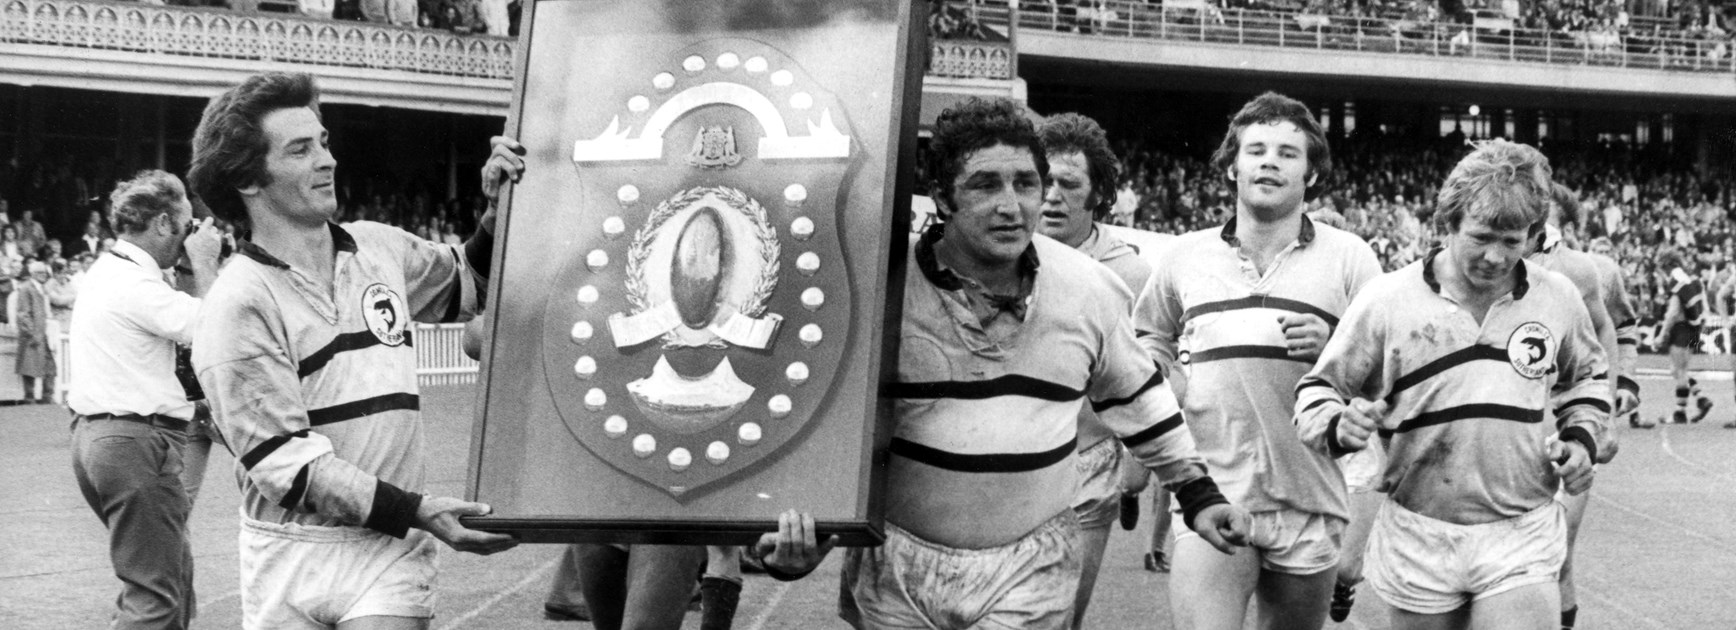 1973 grand final rewind: Sea Eagles prevail in brutal battle of the beaches